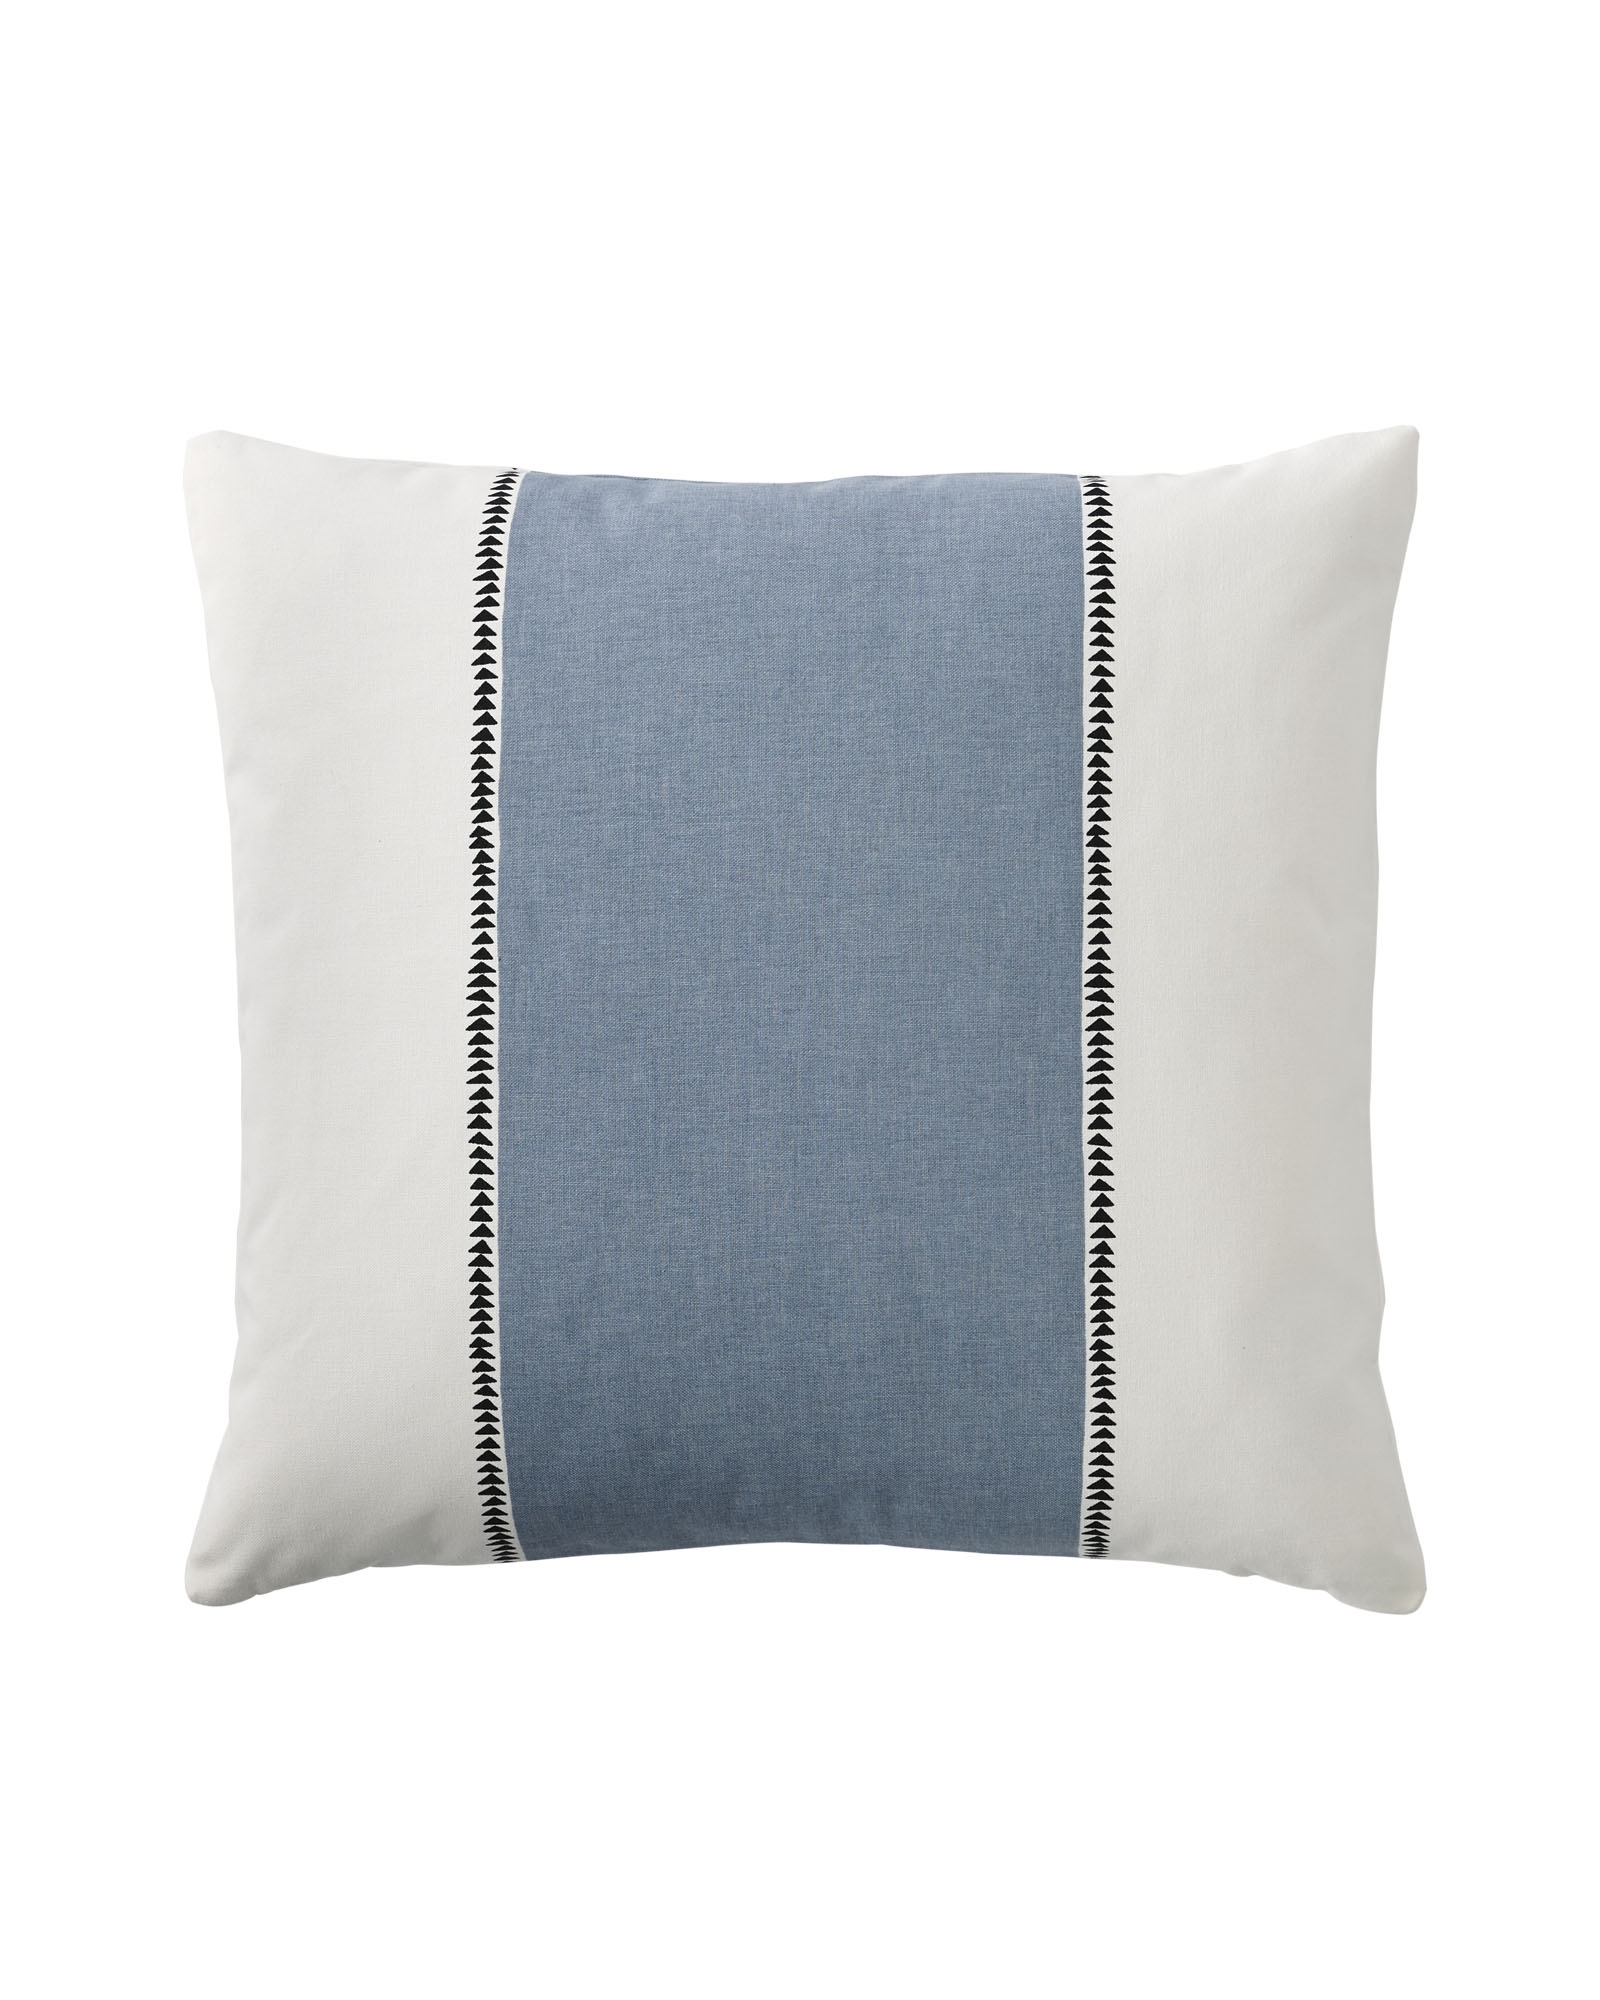 Racing Stripe Pillow Cover - 20" x 20" - Chambray - Insert sold separately - Image 0